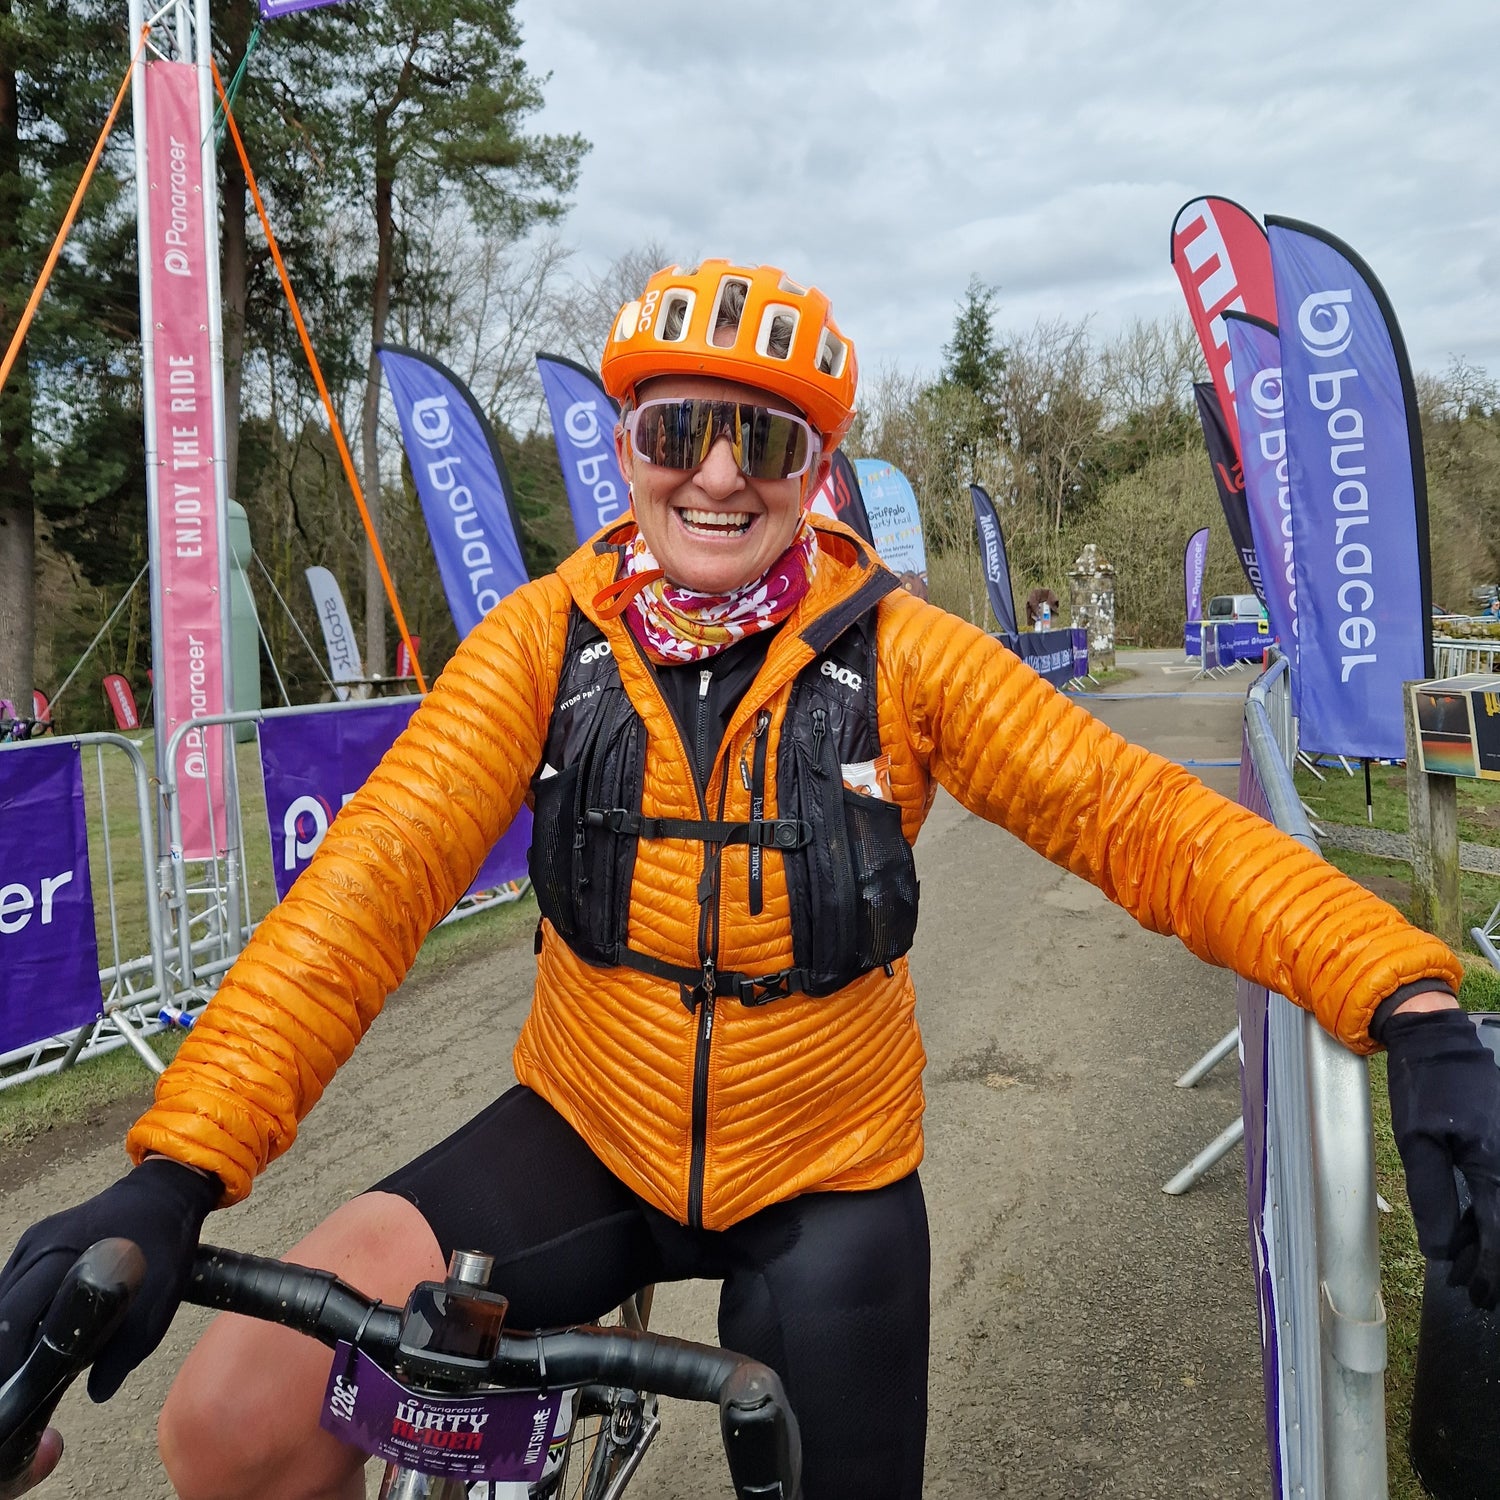 Smiling Cyclist with orange POC helmet and orange jacket at the finish line of a race.